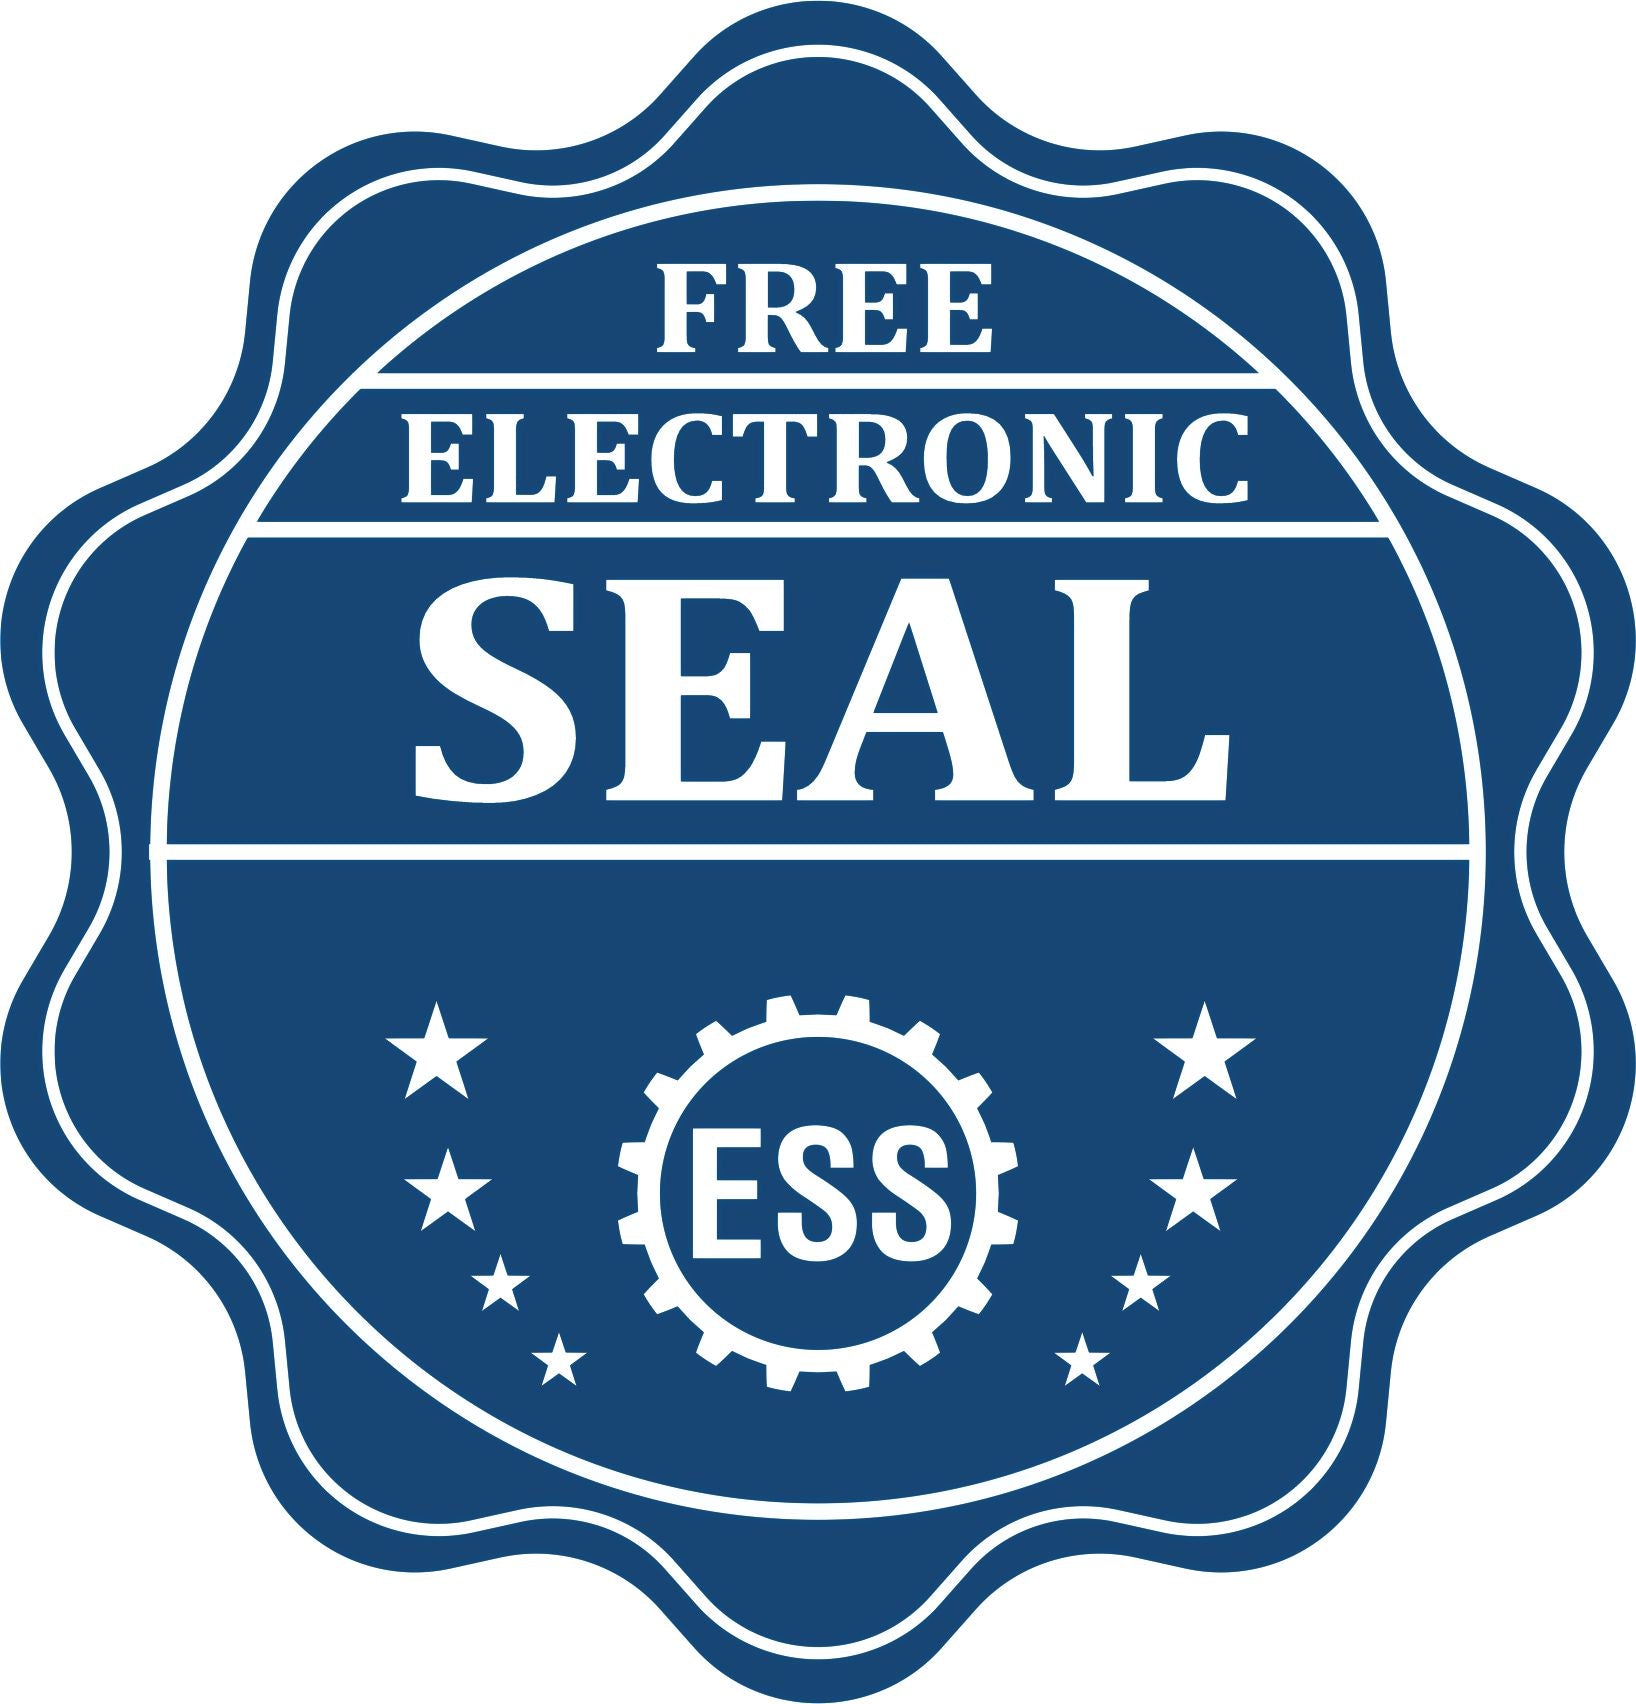 A badge showing a free electronic seal for the Heavy-Duty Arkansas Rectangular Notary Stamp with stars and the ESS gear on the emblem.